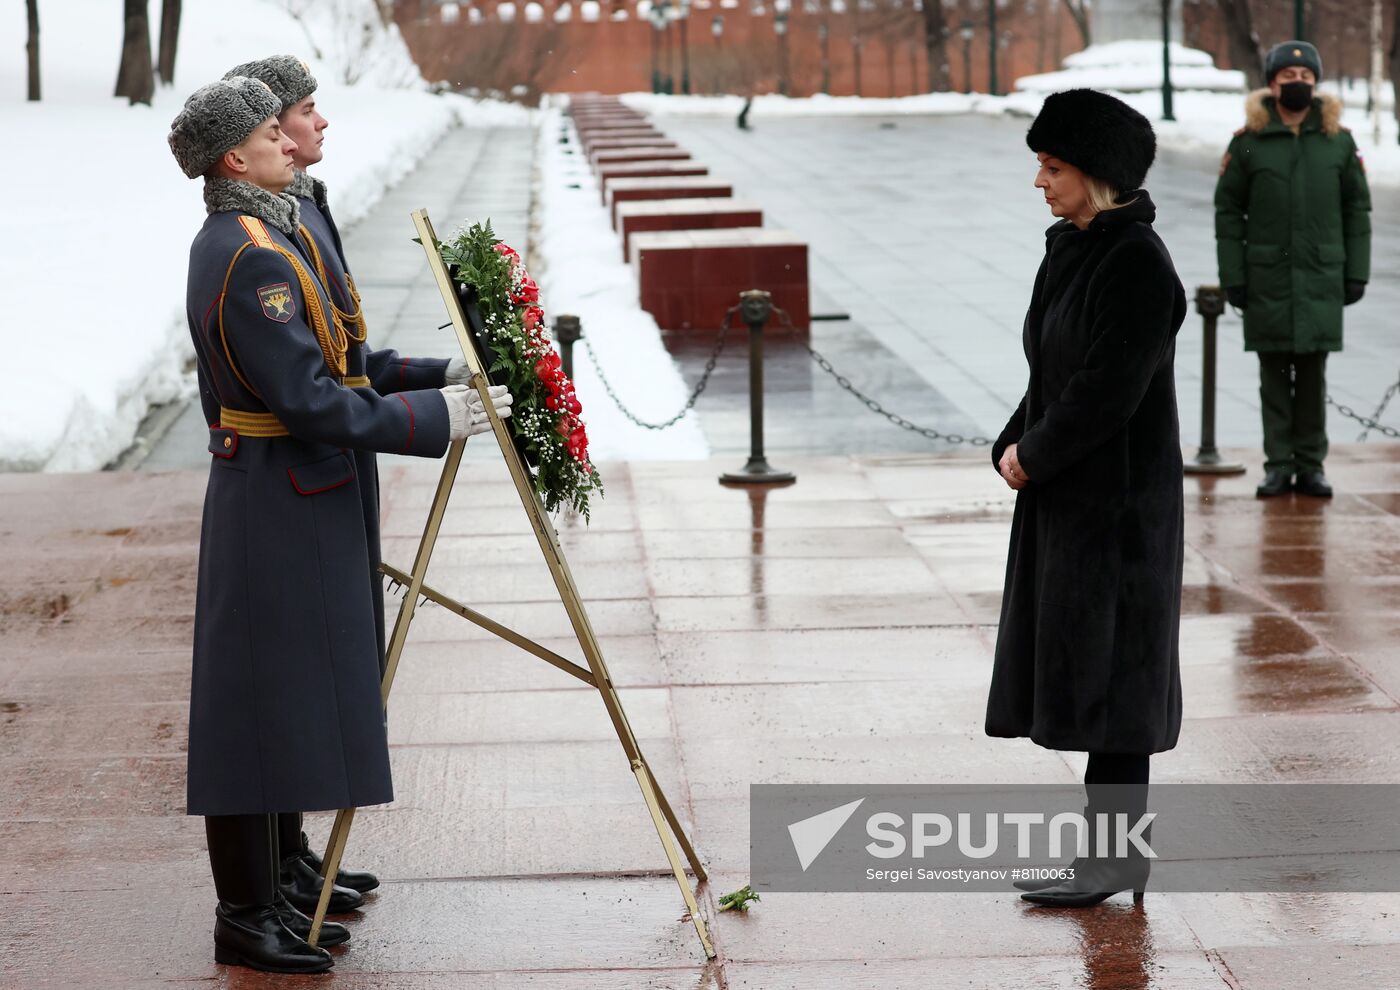 Russia Britain Wreath Laying